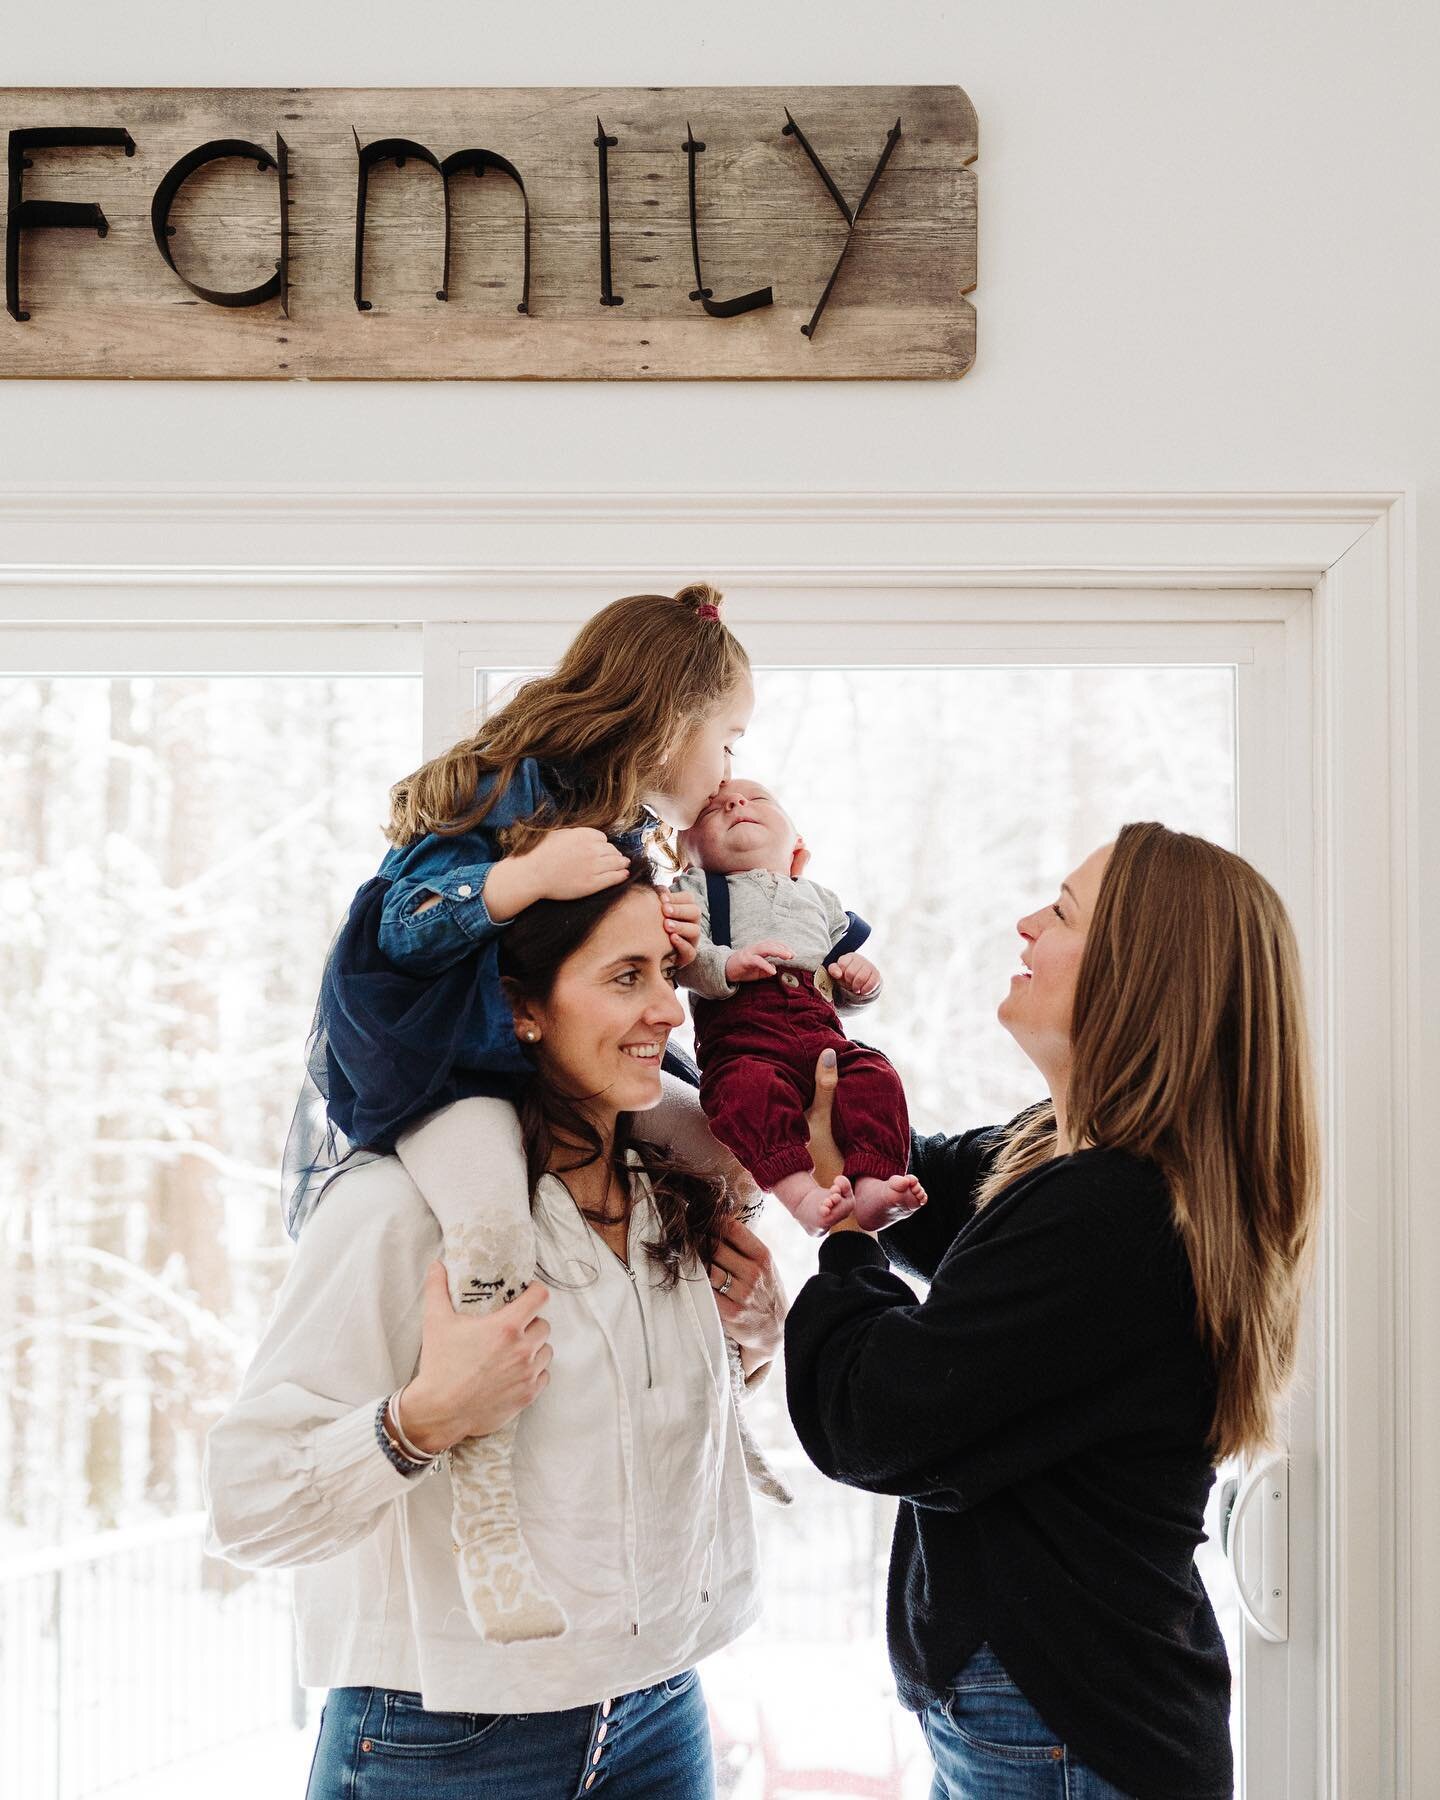 I&rsquo;ve been working on something super special that I just can&rsquo;t wait to share later this week! Until then, please enjoy this gorgeous family of four. 😍

At home Family Session for @jnassar15 &amp; @_kaylanassar_ 

#seanawilliamsonfamily #